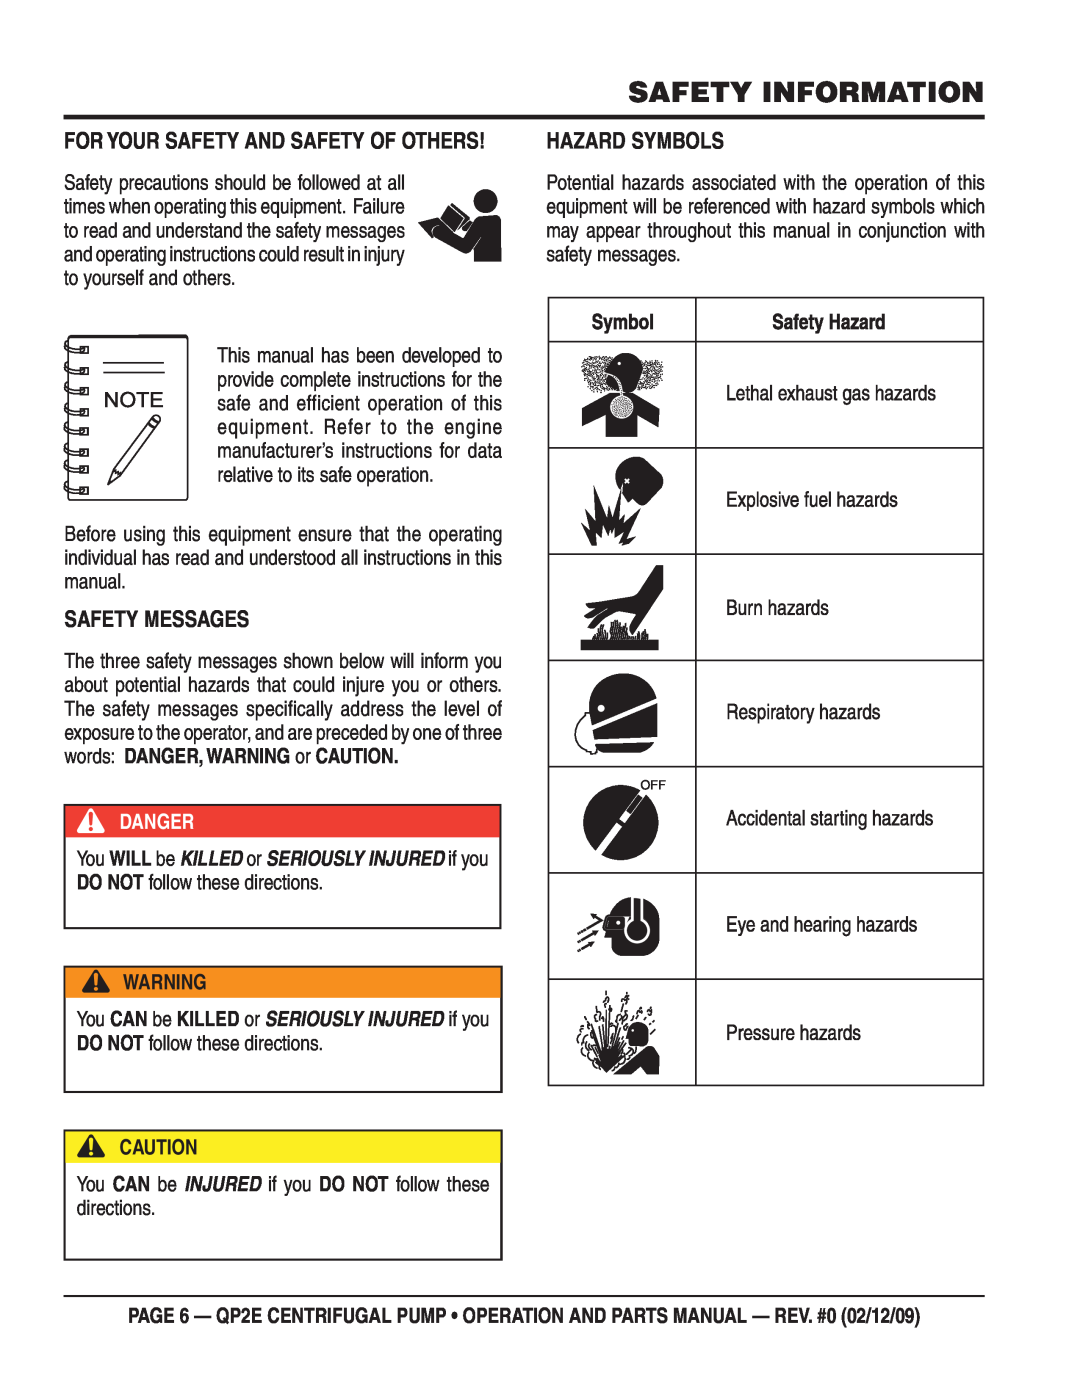 Multiquip QP2E manual Safety Information, Safety Messages, Hazard Symbols, For Your Safety And Safety Of Others, Danger 